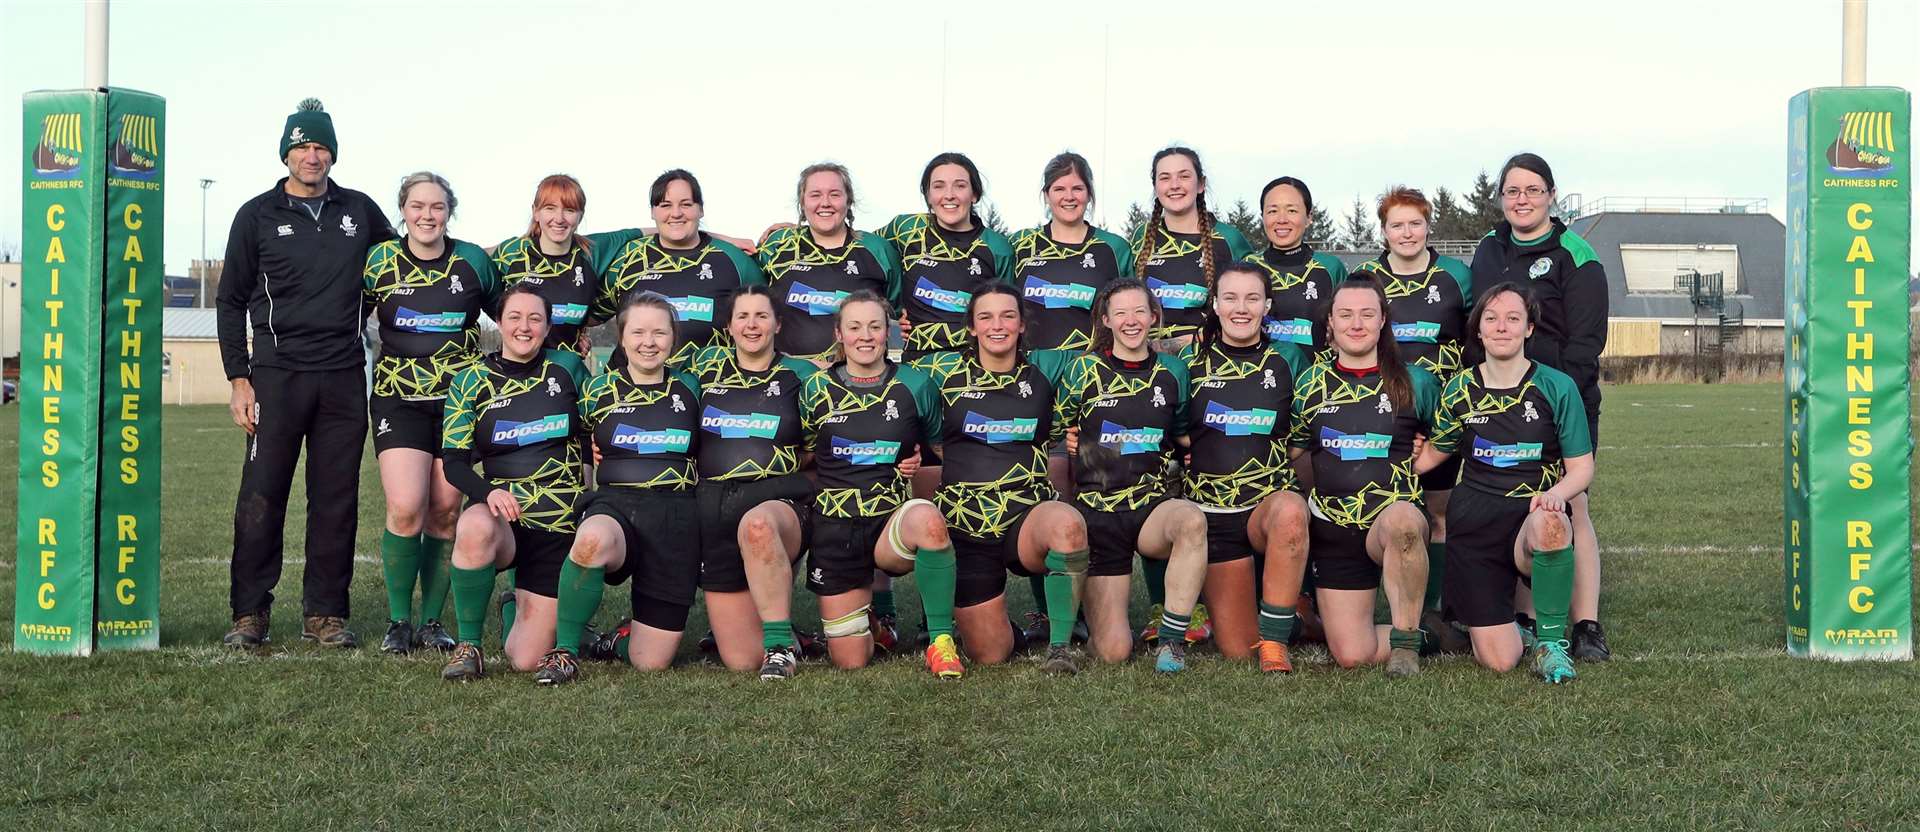 The Caithness Krakens who defeated Fraserburgh in the Scottish Women's Bowl. Picture: James Gunn